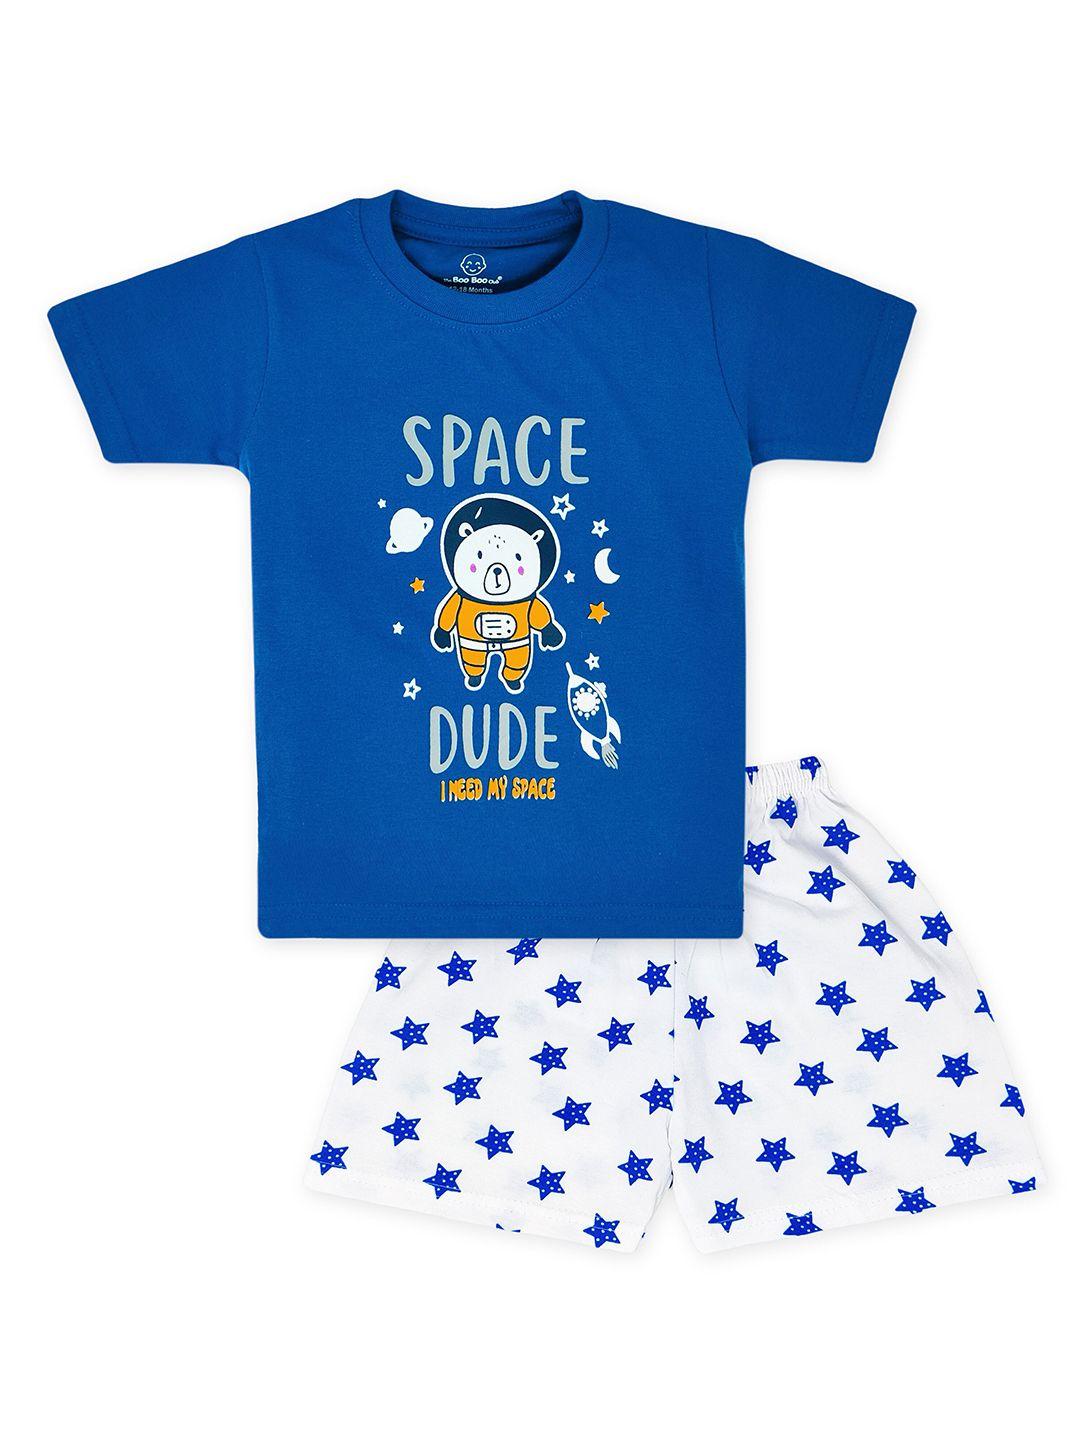 the boo club kids turquoise blue & white printed t-shirt with shorts